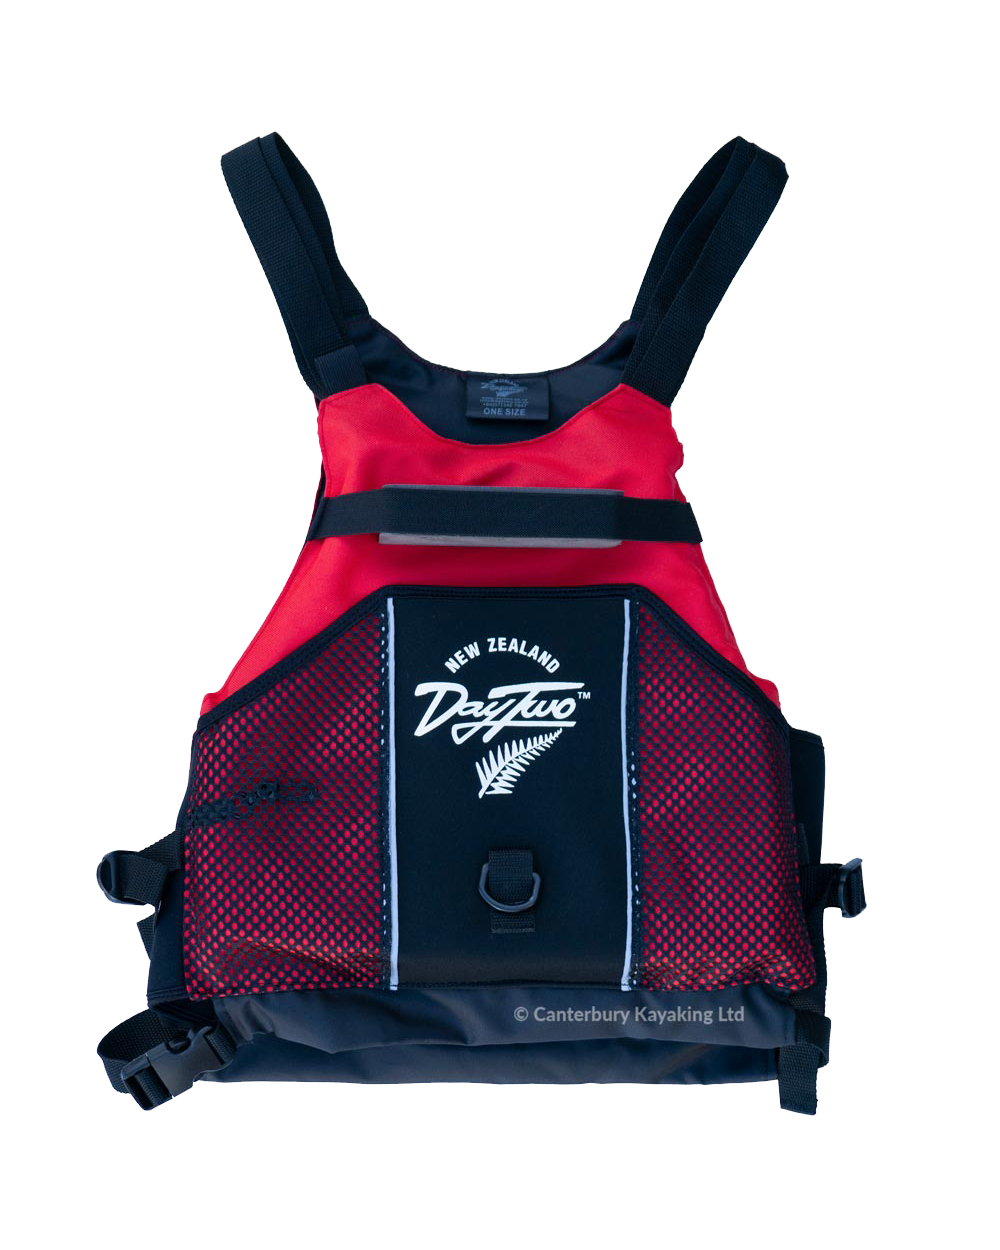 Day Two Adventure Racer PFD